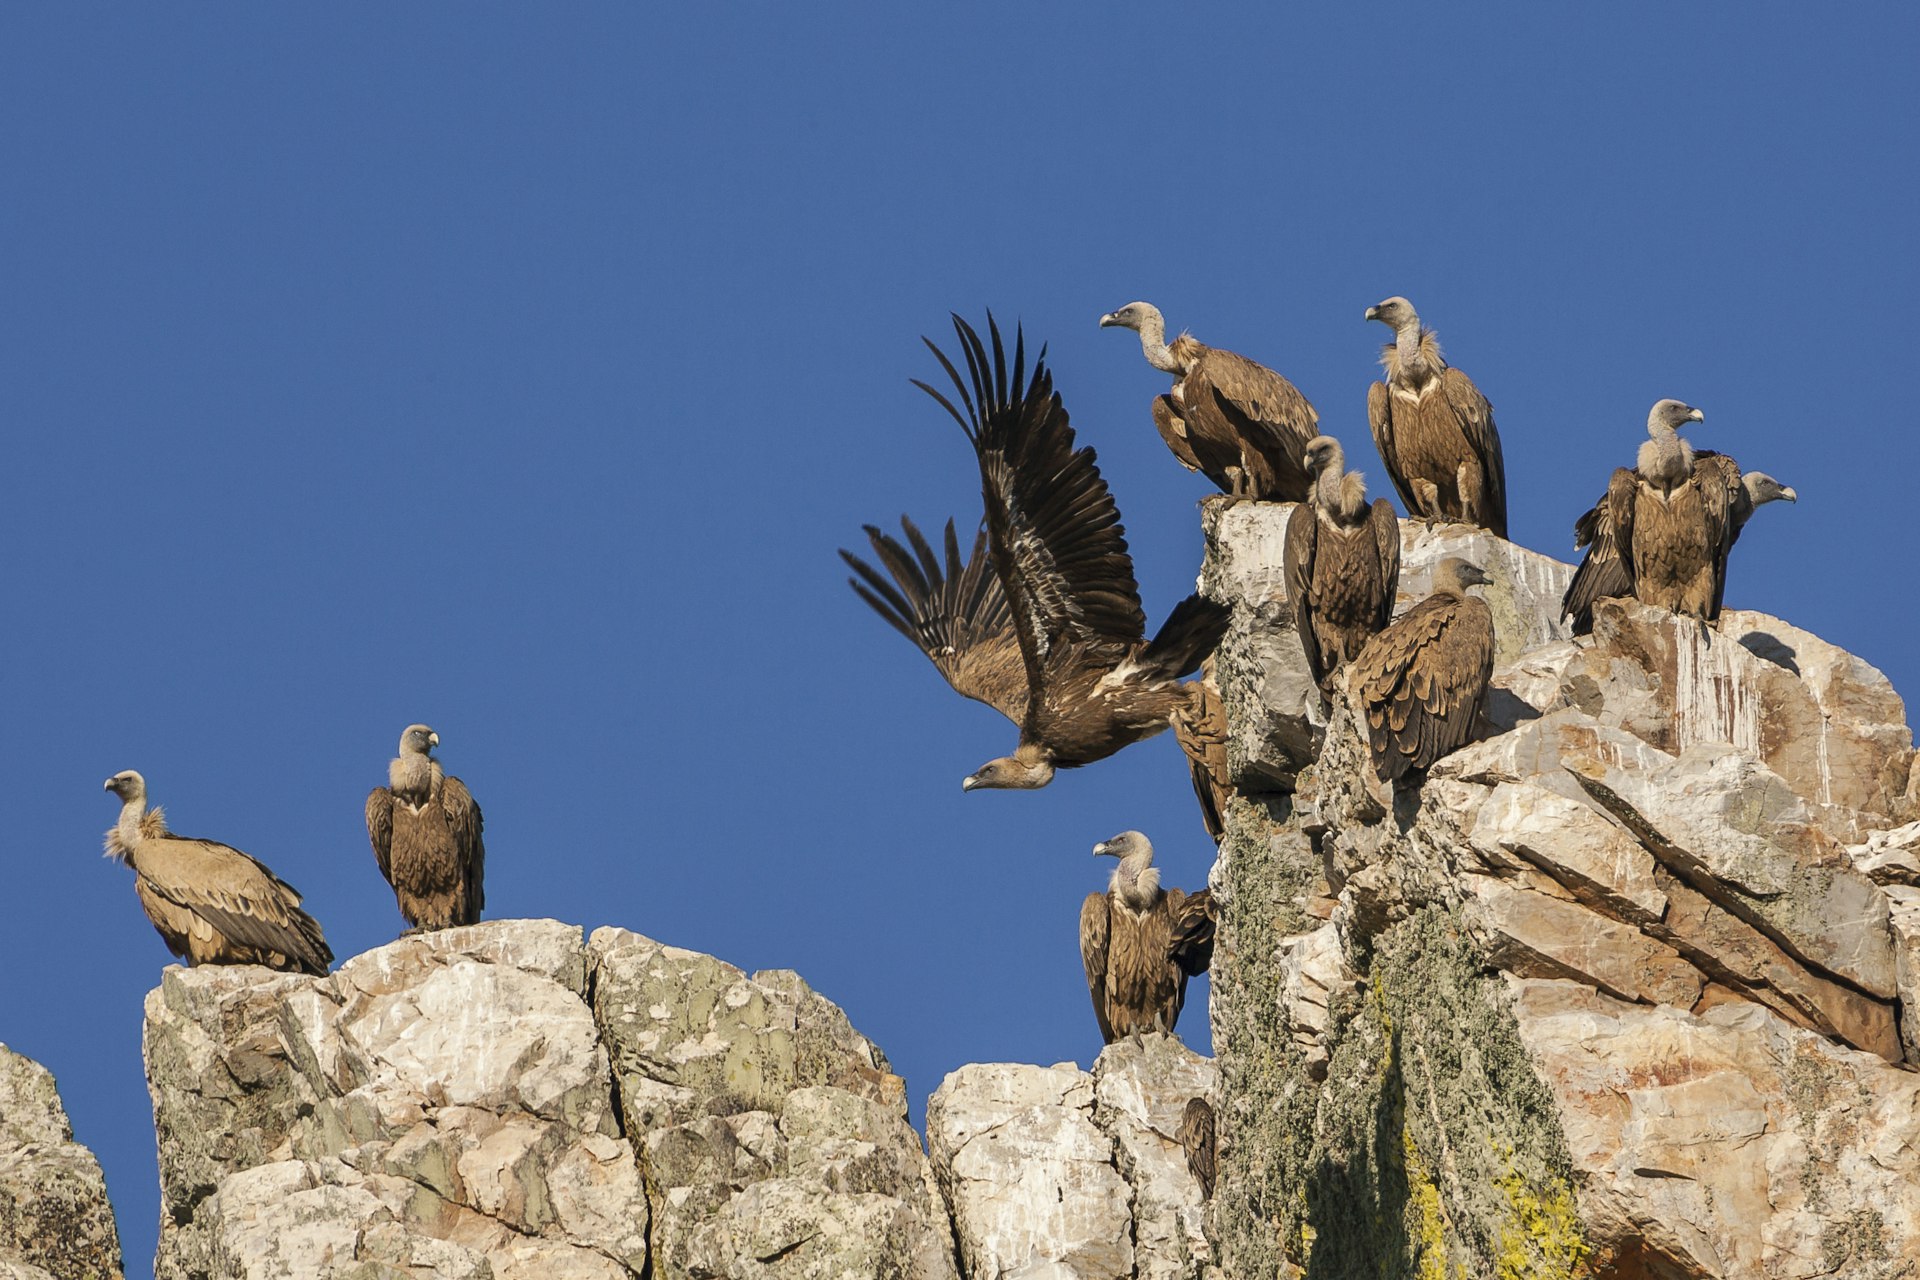 Griffon vultures are just one of the bird species to look out for in Monfrague National Park. © Javier Fernández Sánchez / Getty Images